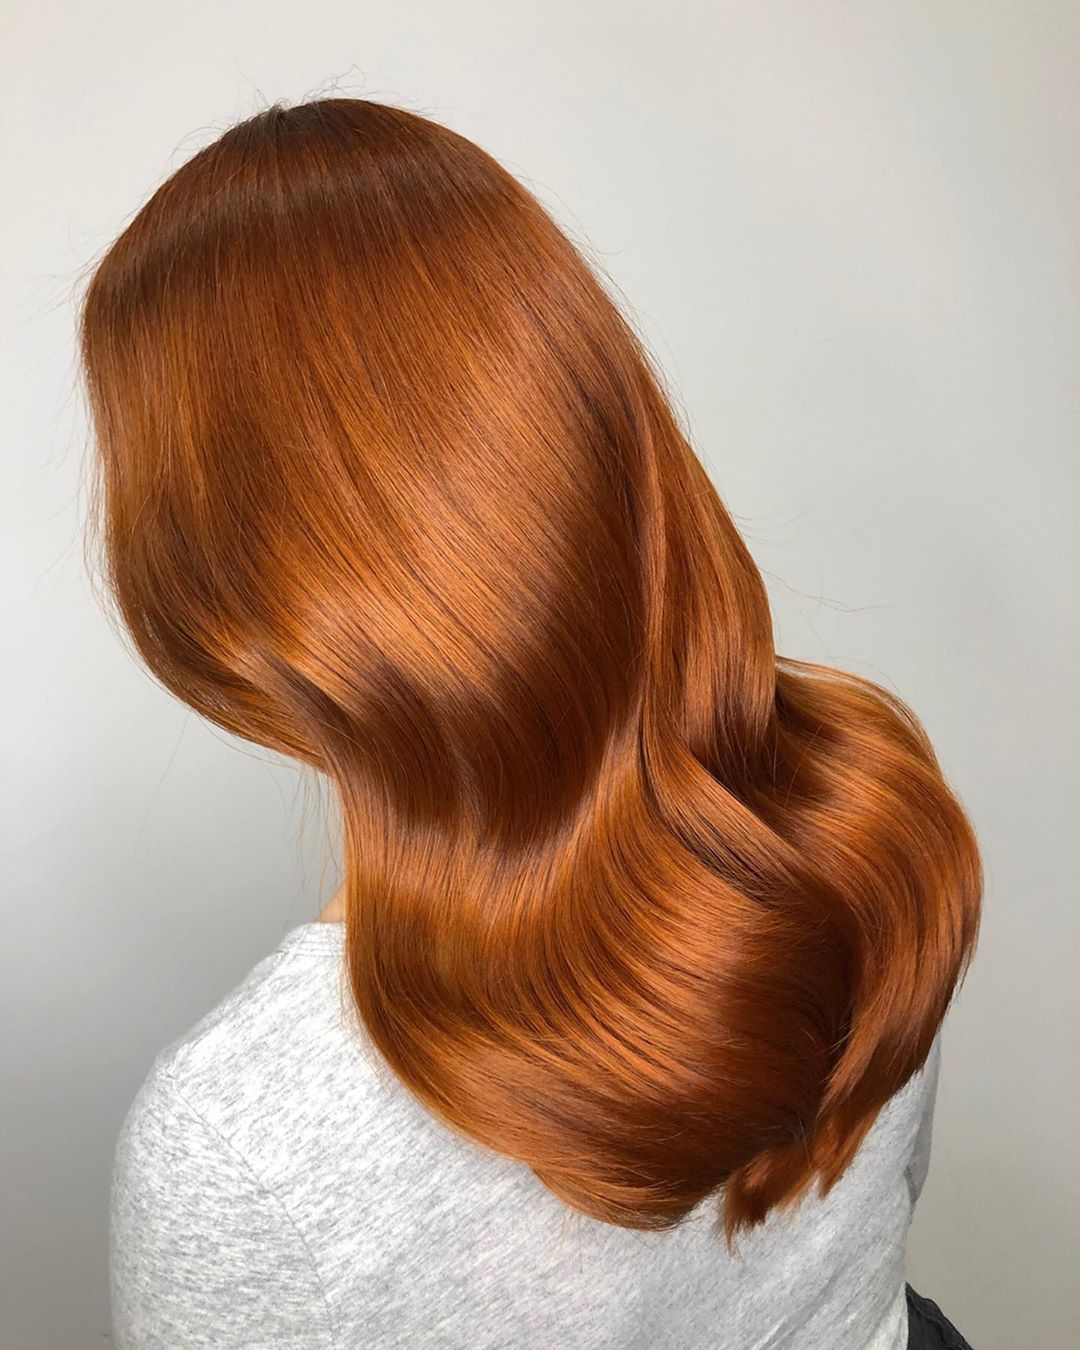 As Glad Rond en rond Wella Education Twitterren: "Showcasing 🆕 colors and techniques is a great  way to grow your personal brand while expanding your skillset. Try this  fiery formula from @laila.wella for your next copper client.🔥 . #